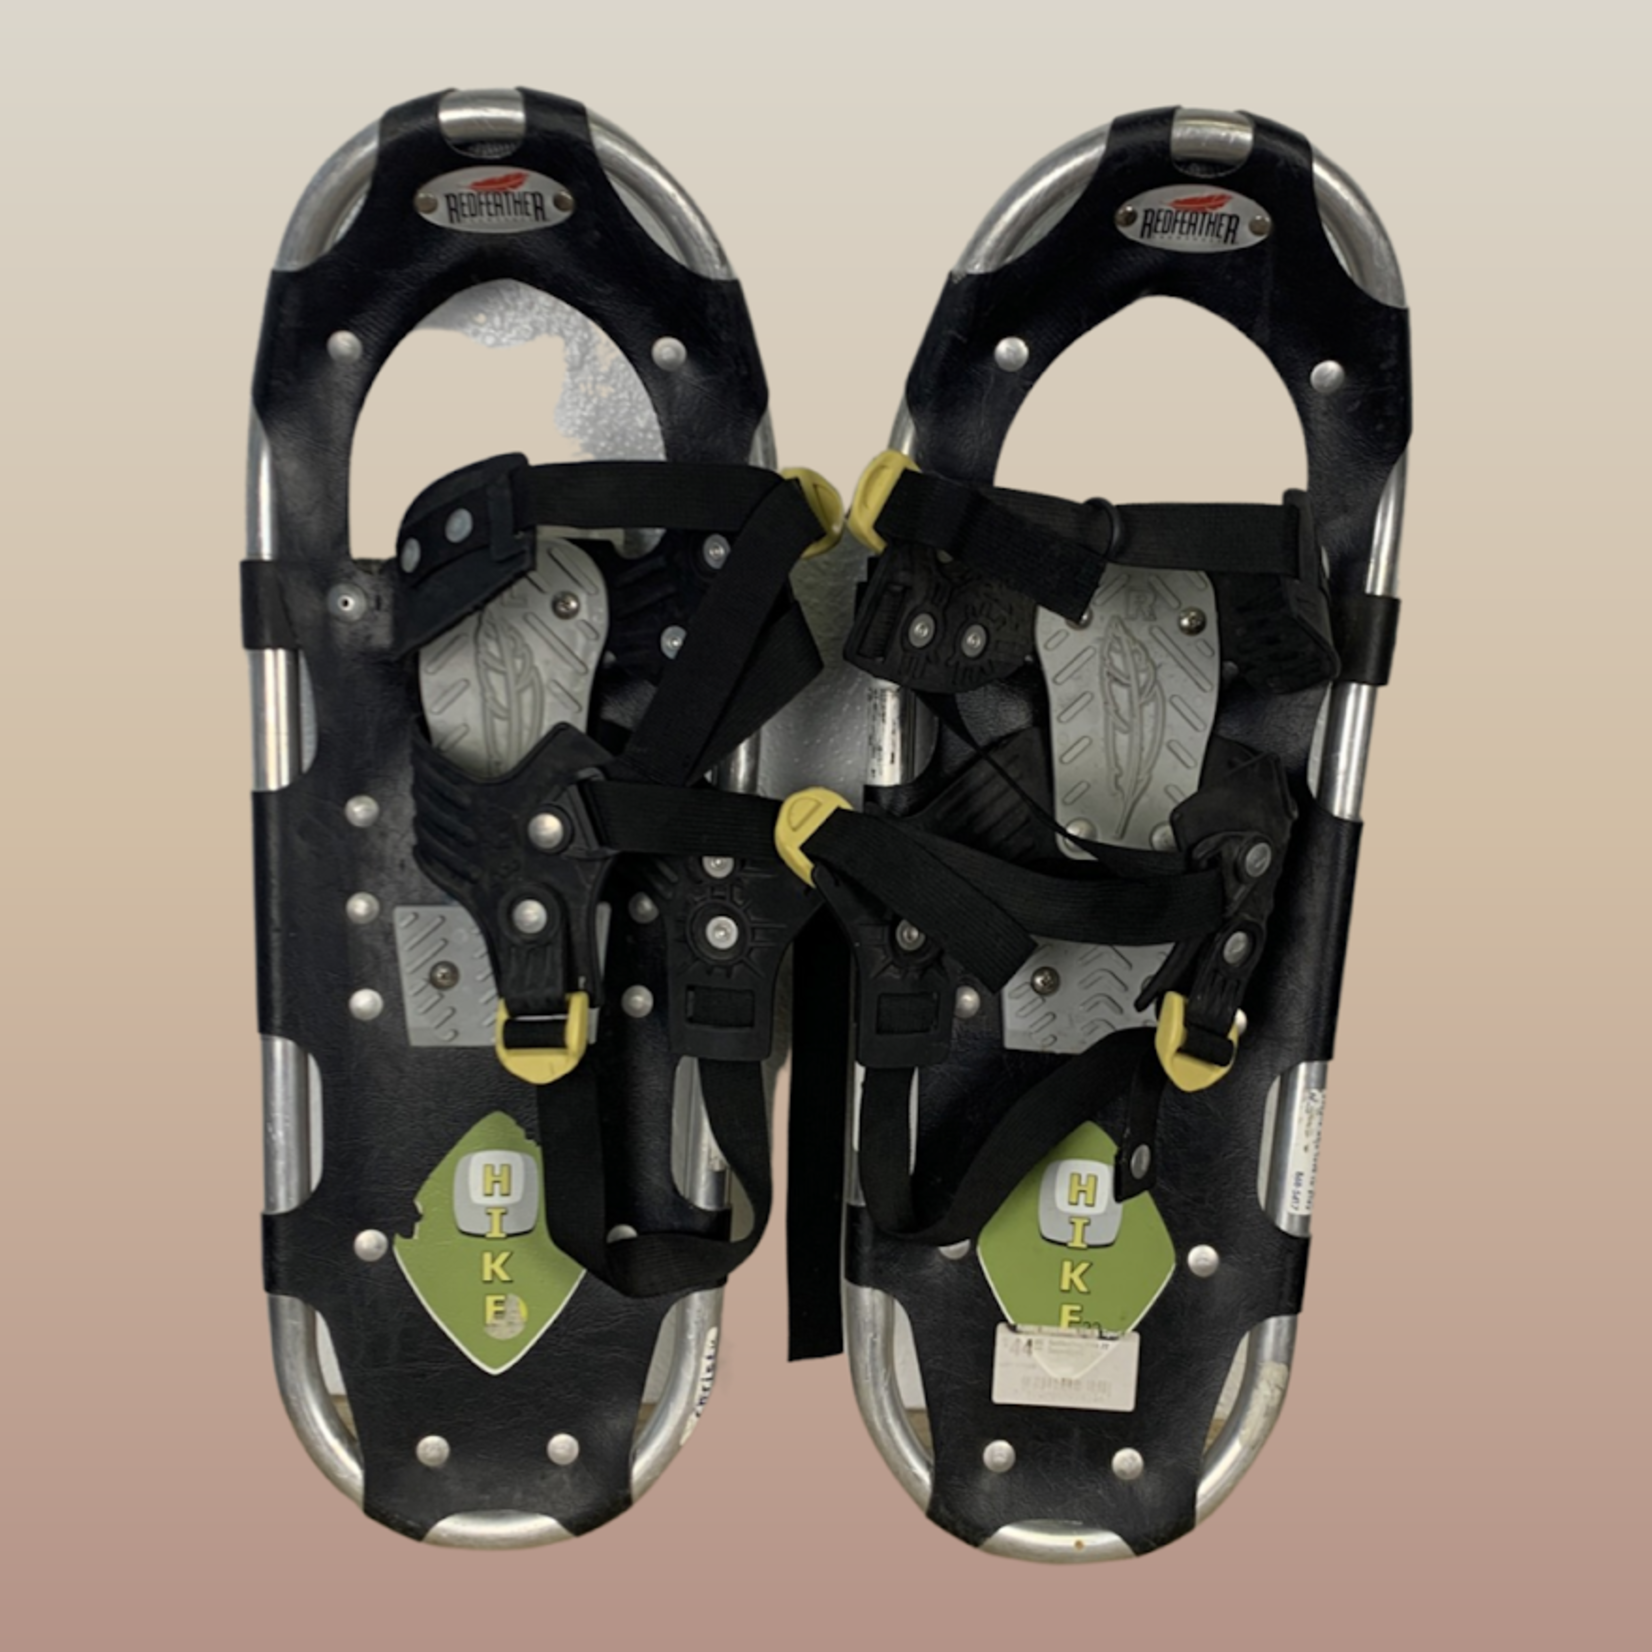 Redfeather Redfeather Hike Snowshoes 22 inch.